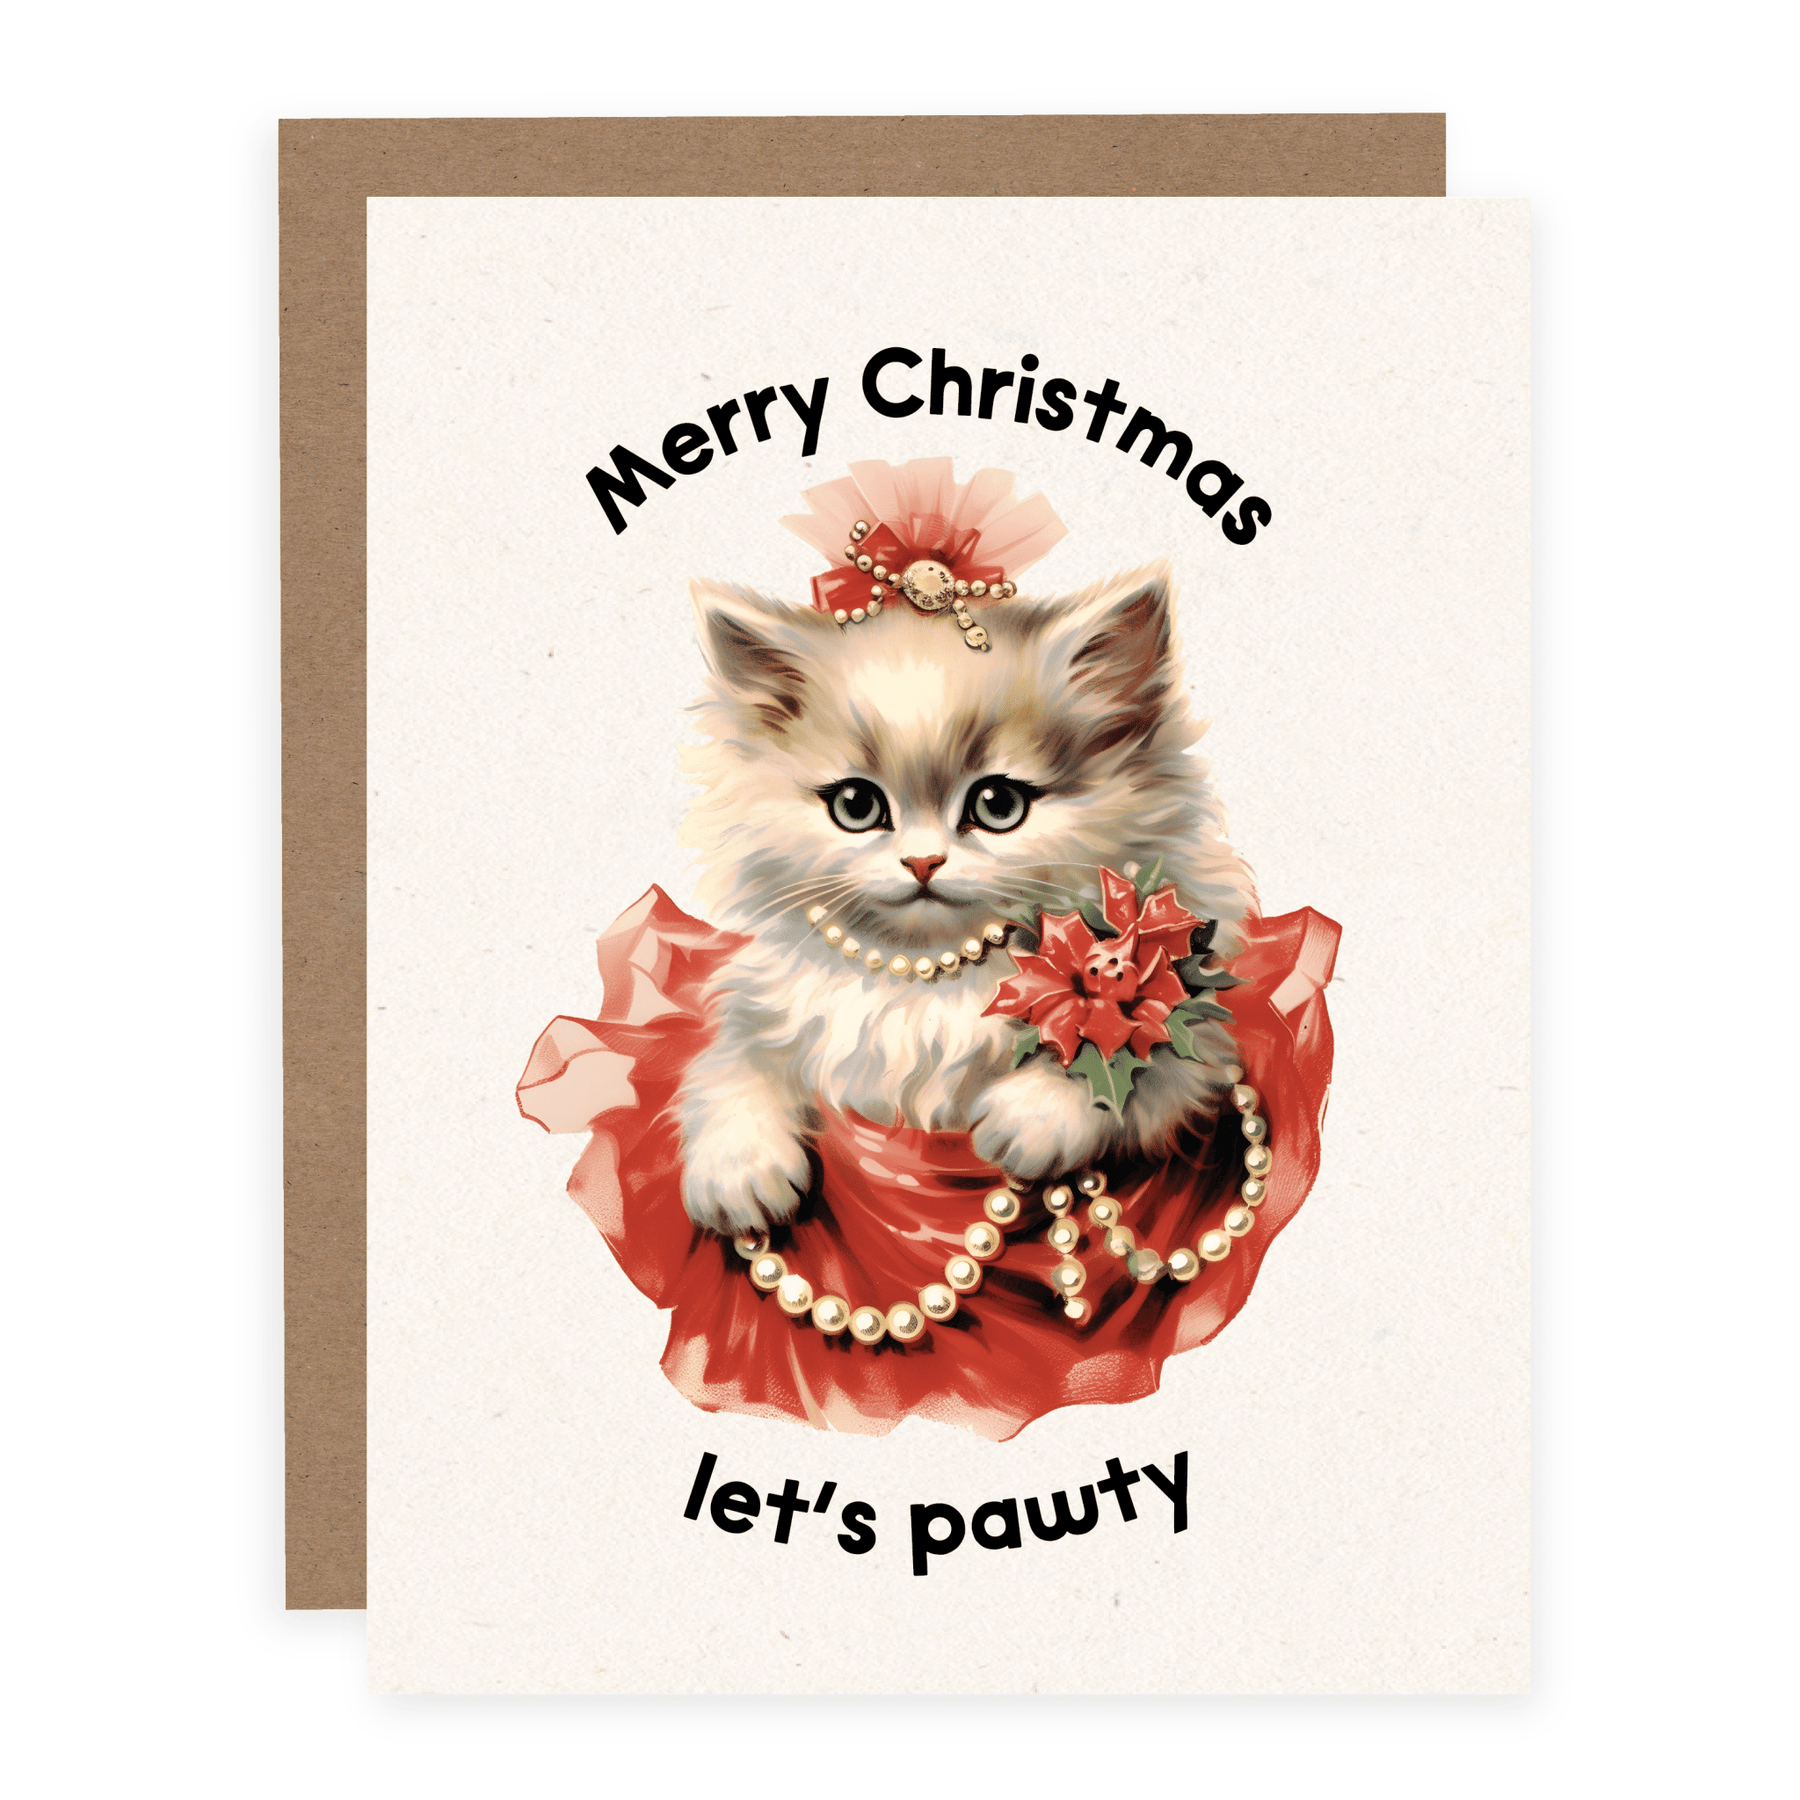 Let's Pawty Christmas Card